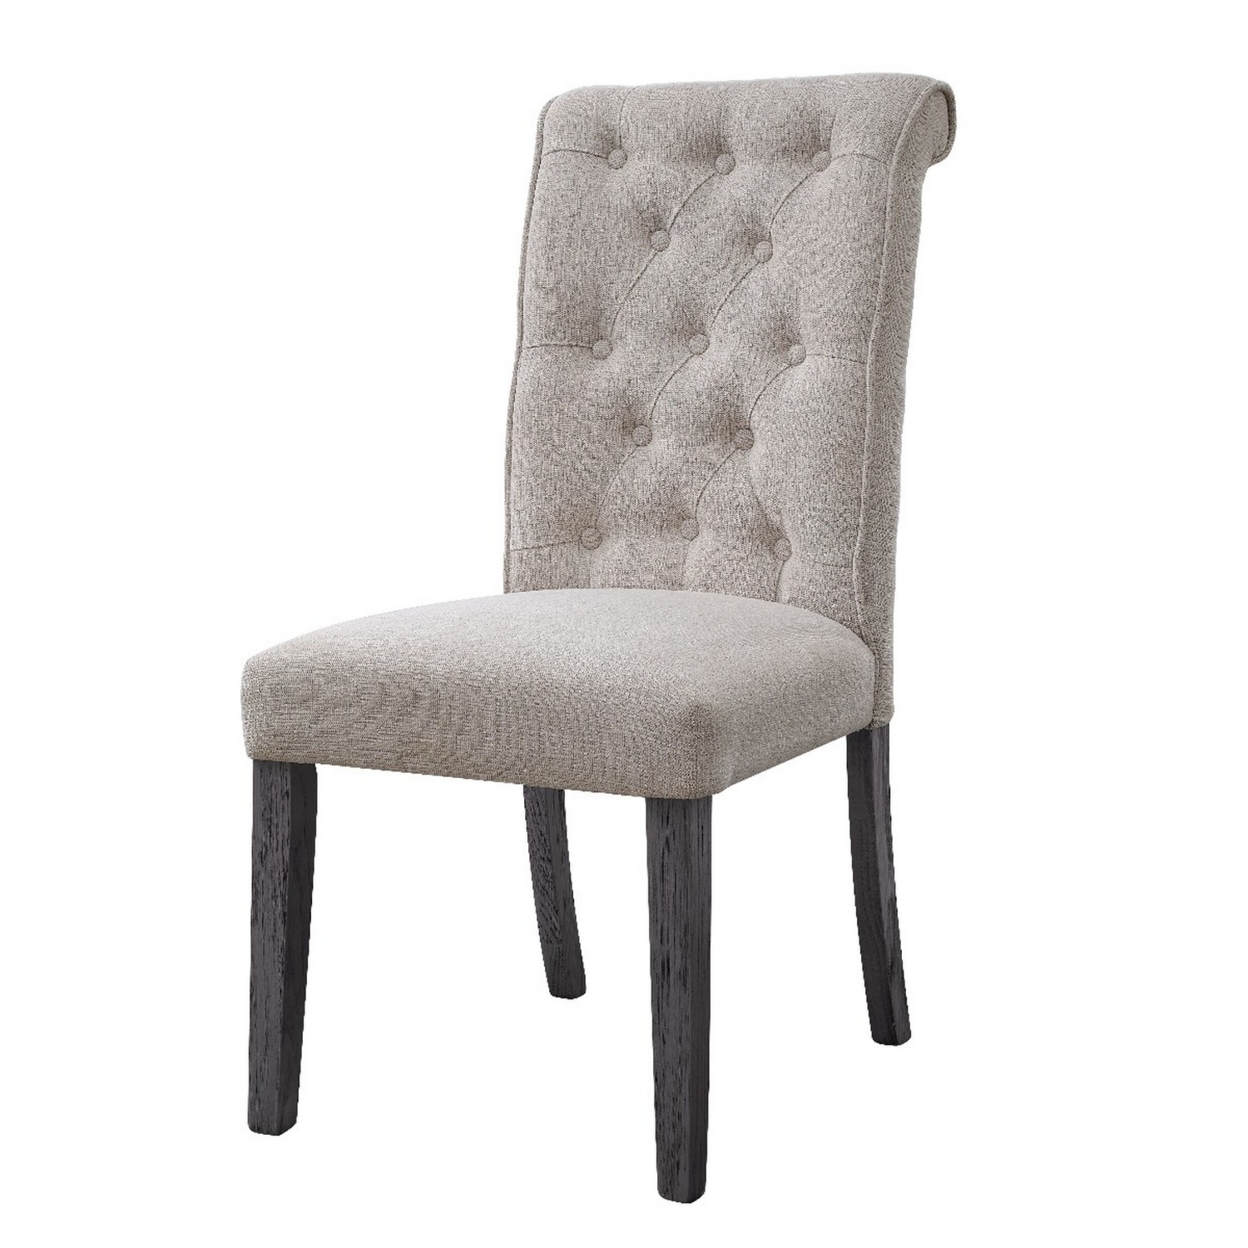 Side Chair With Button Tufted Backrest, Set Of 2, Beige- Saltoro Sherpi